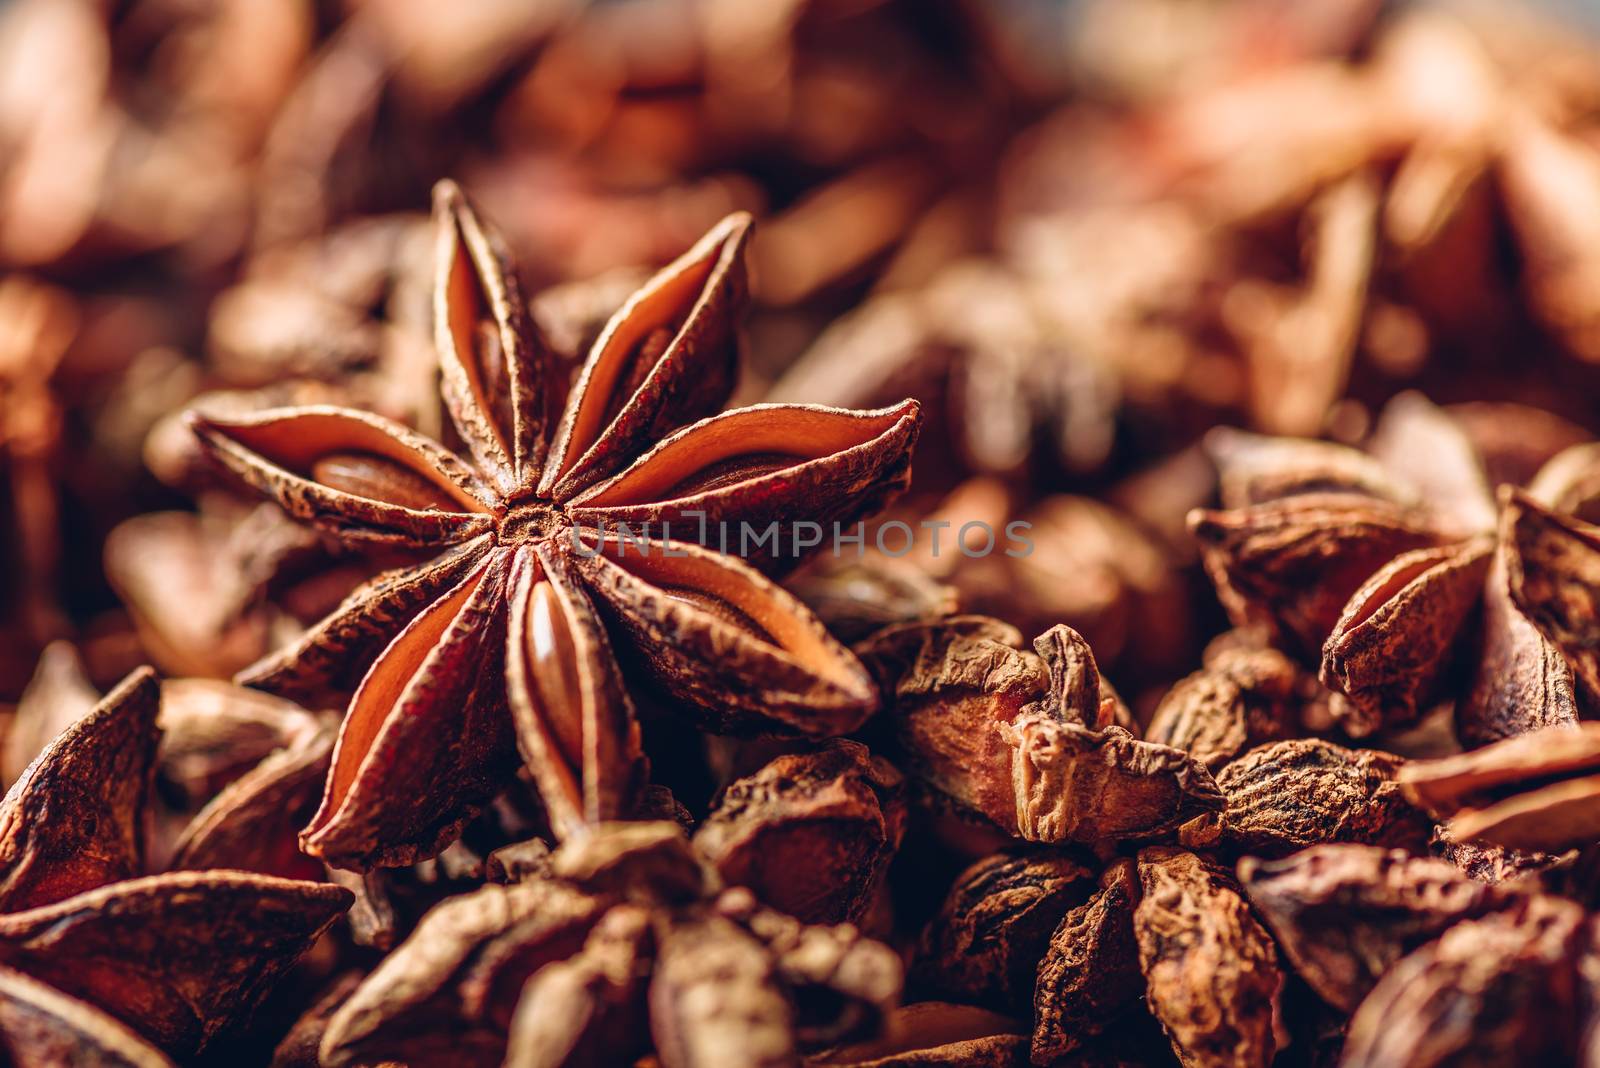 Star Anise Fruits and Seeds. by Seva_blsv